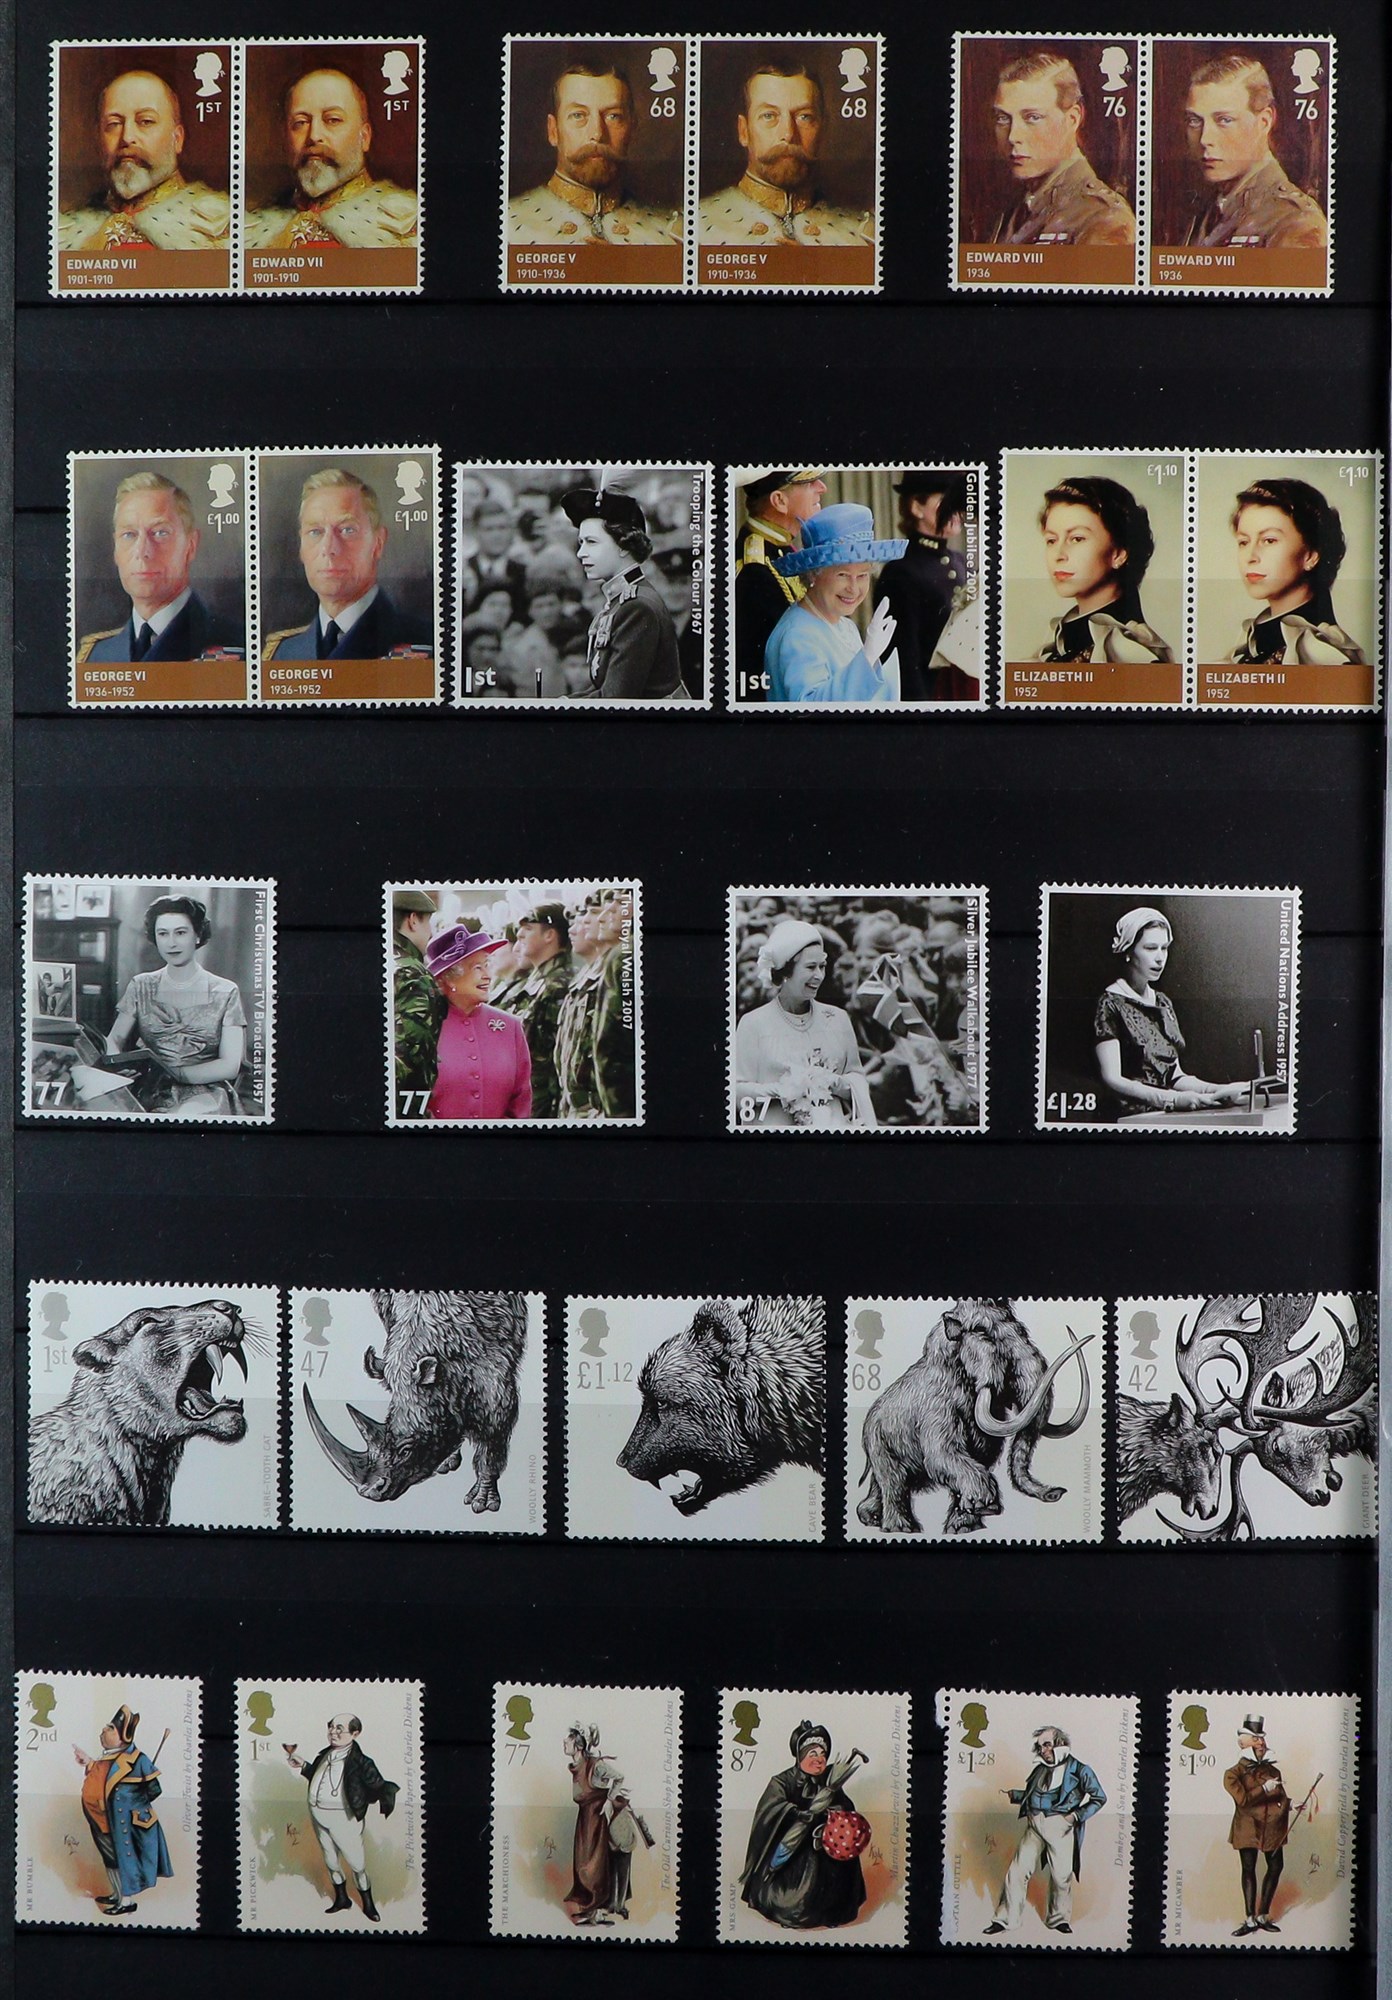 GB.ELIZABETH II 1991-2012 COMPREHENSIVE NEVER HINGED MINT COLLECTION in two stock books, seems to be - Image 6 of 8